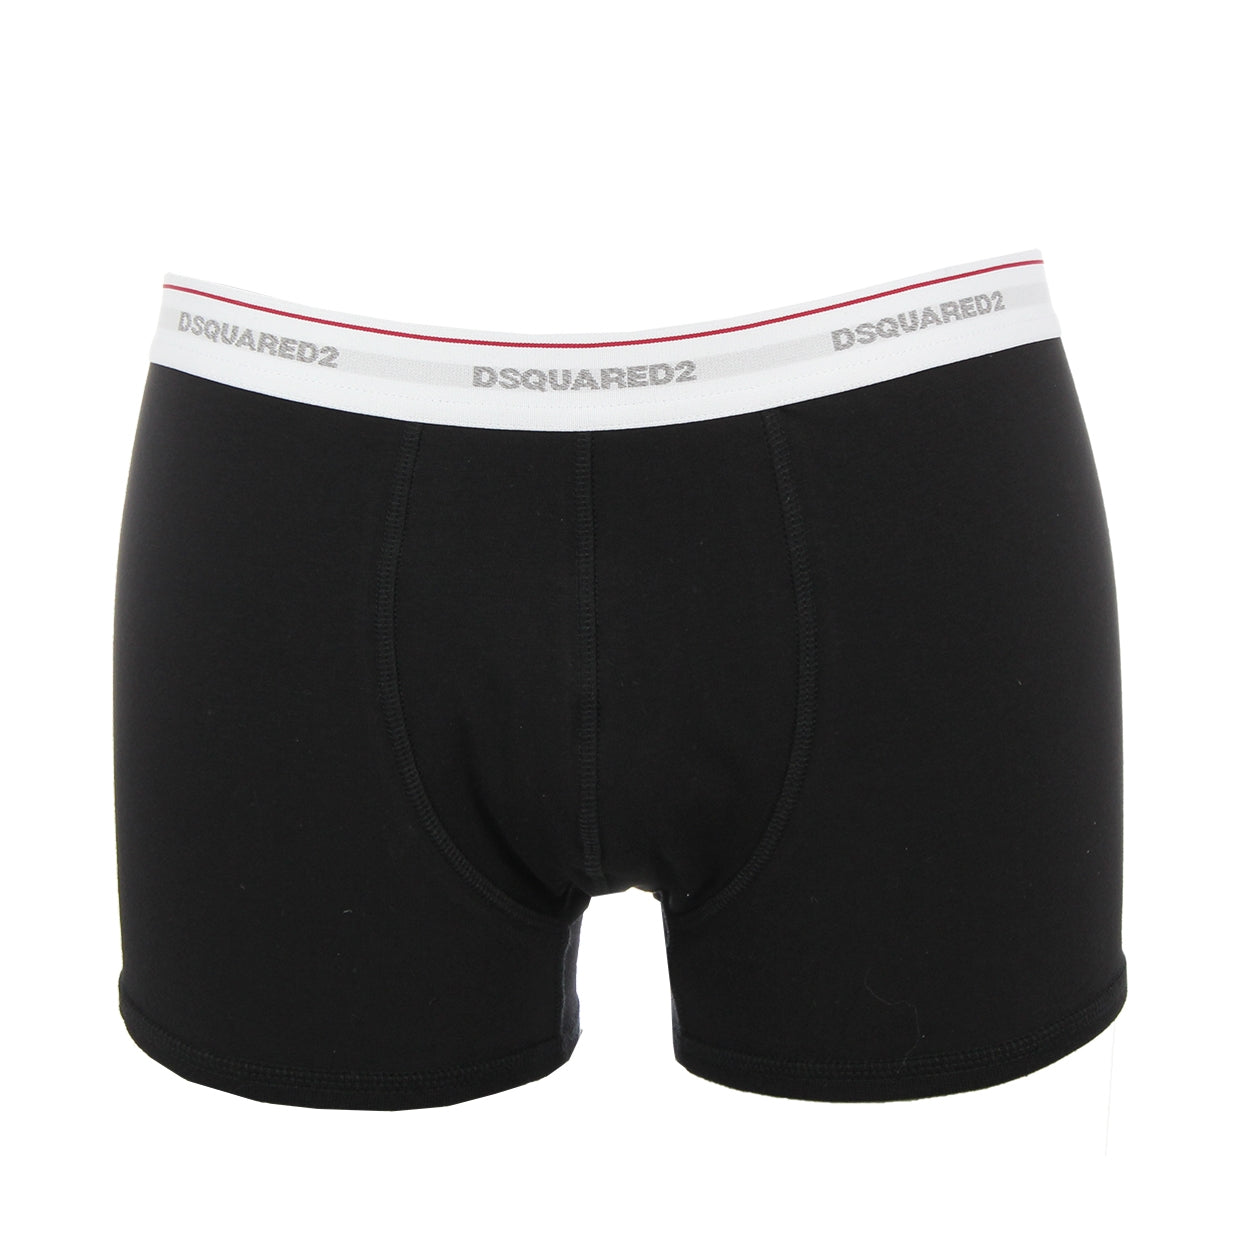 DSquared2 Twin Pack Black Cotton Stretch Boxer Shorts front 